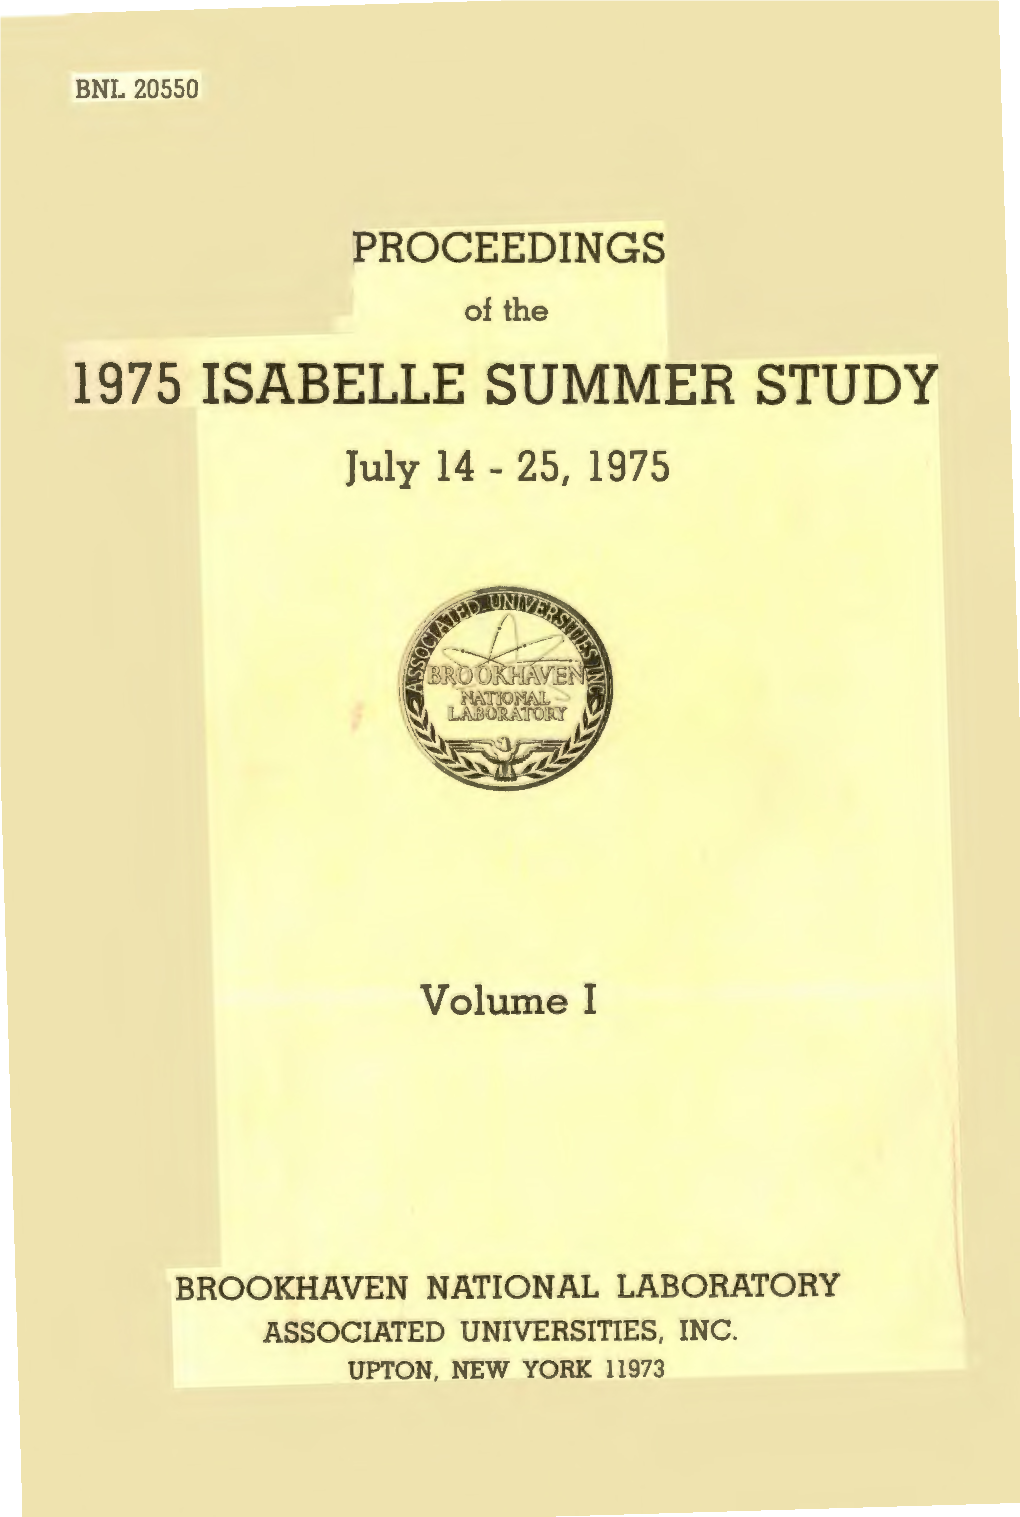 1975 ISABELLE SUMMER ·STUDY July 14 - 25, 1975